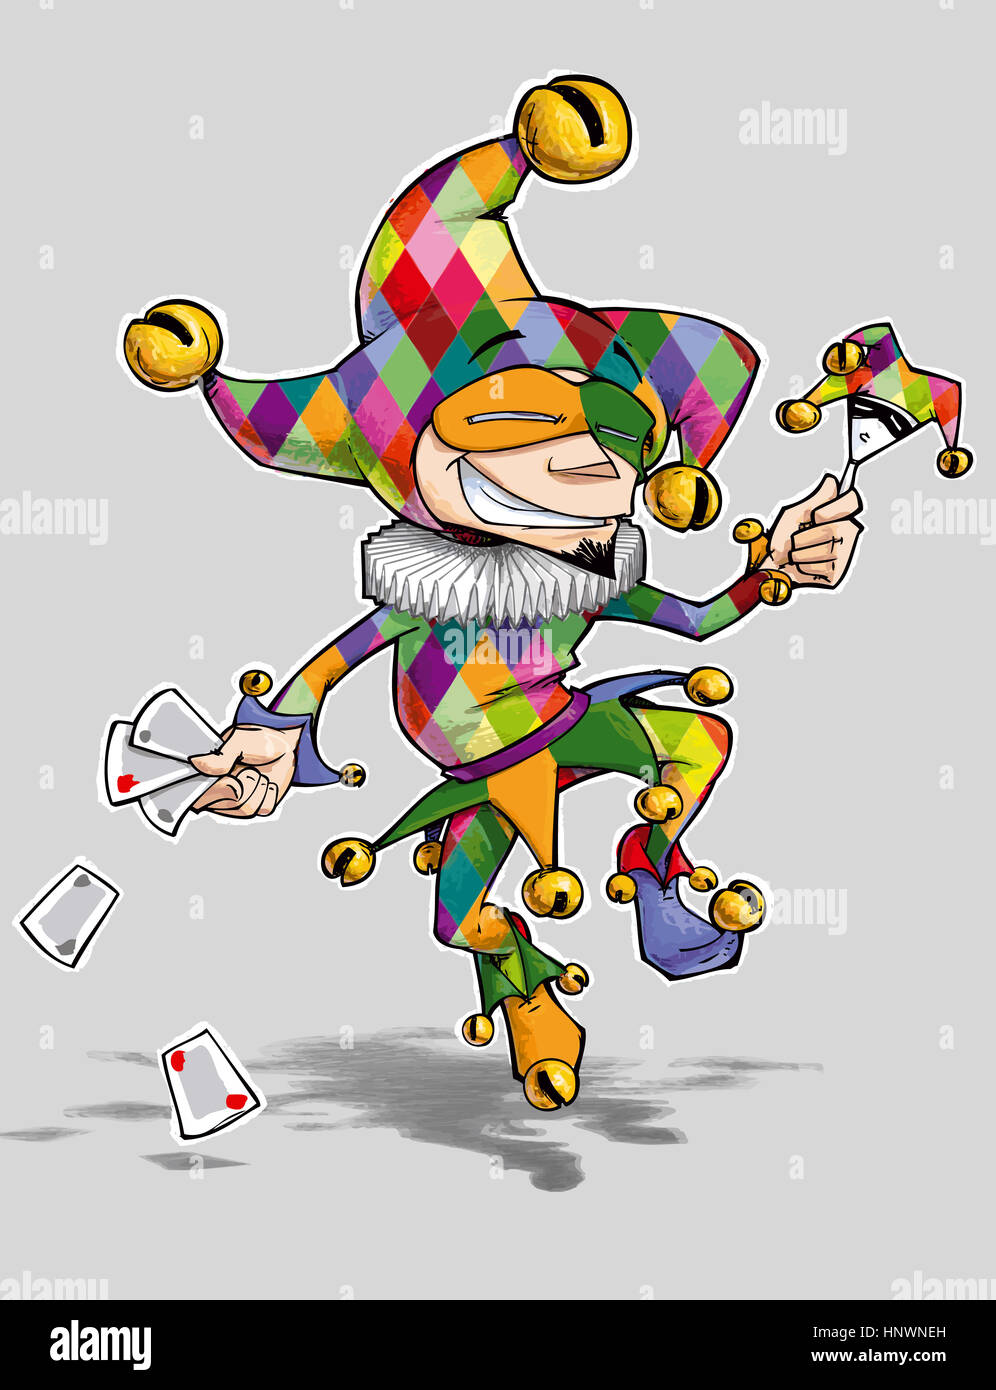 Cartoon illustration of a dancing jester in colourful diamond outfit. Stock Photo